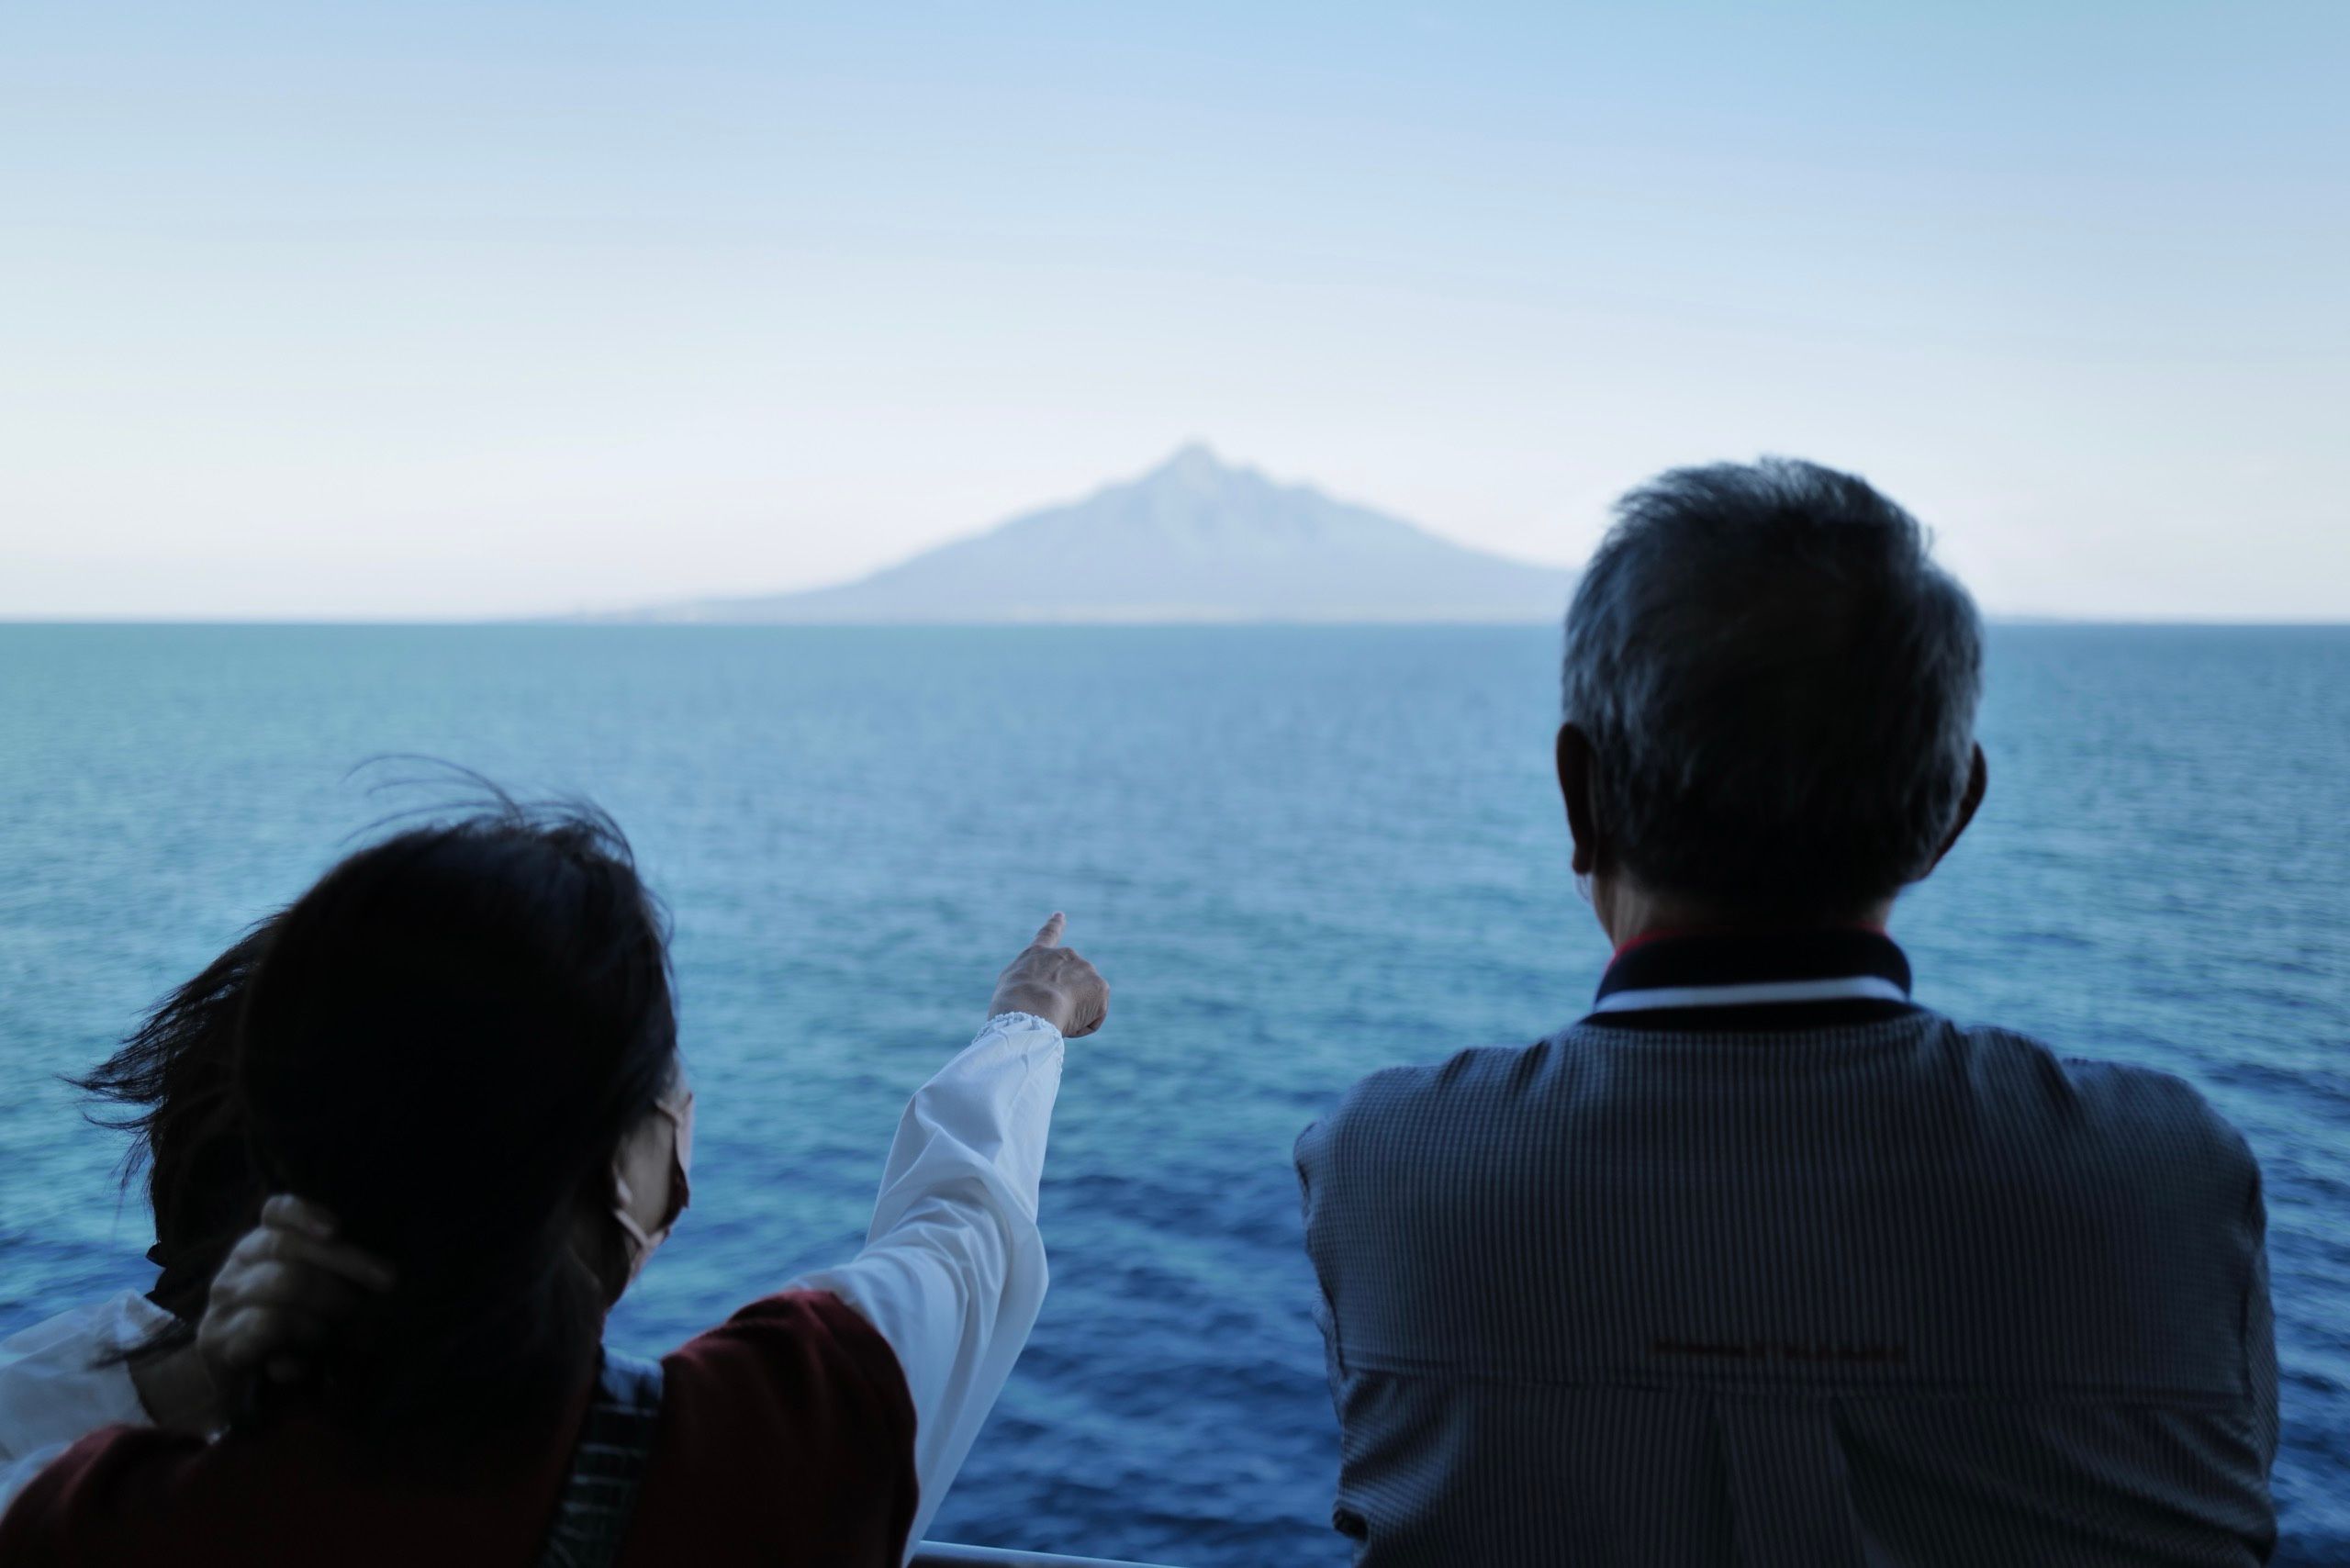 A woman, standing next to an older man, points at a volcano, Mount Rishiri, across the sea